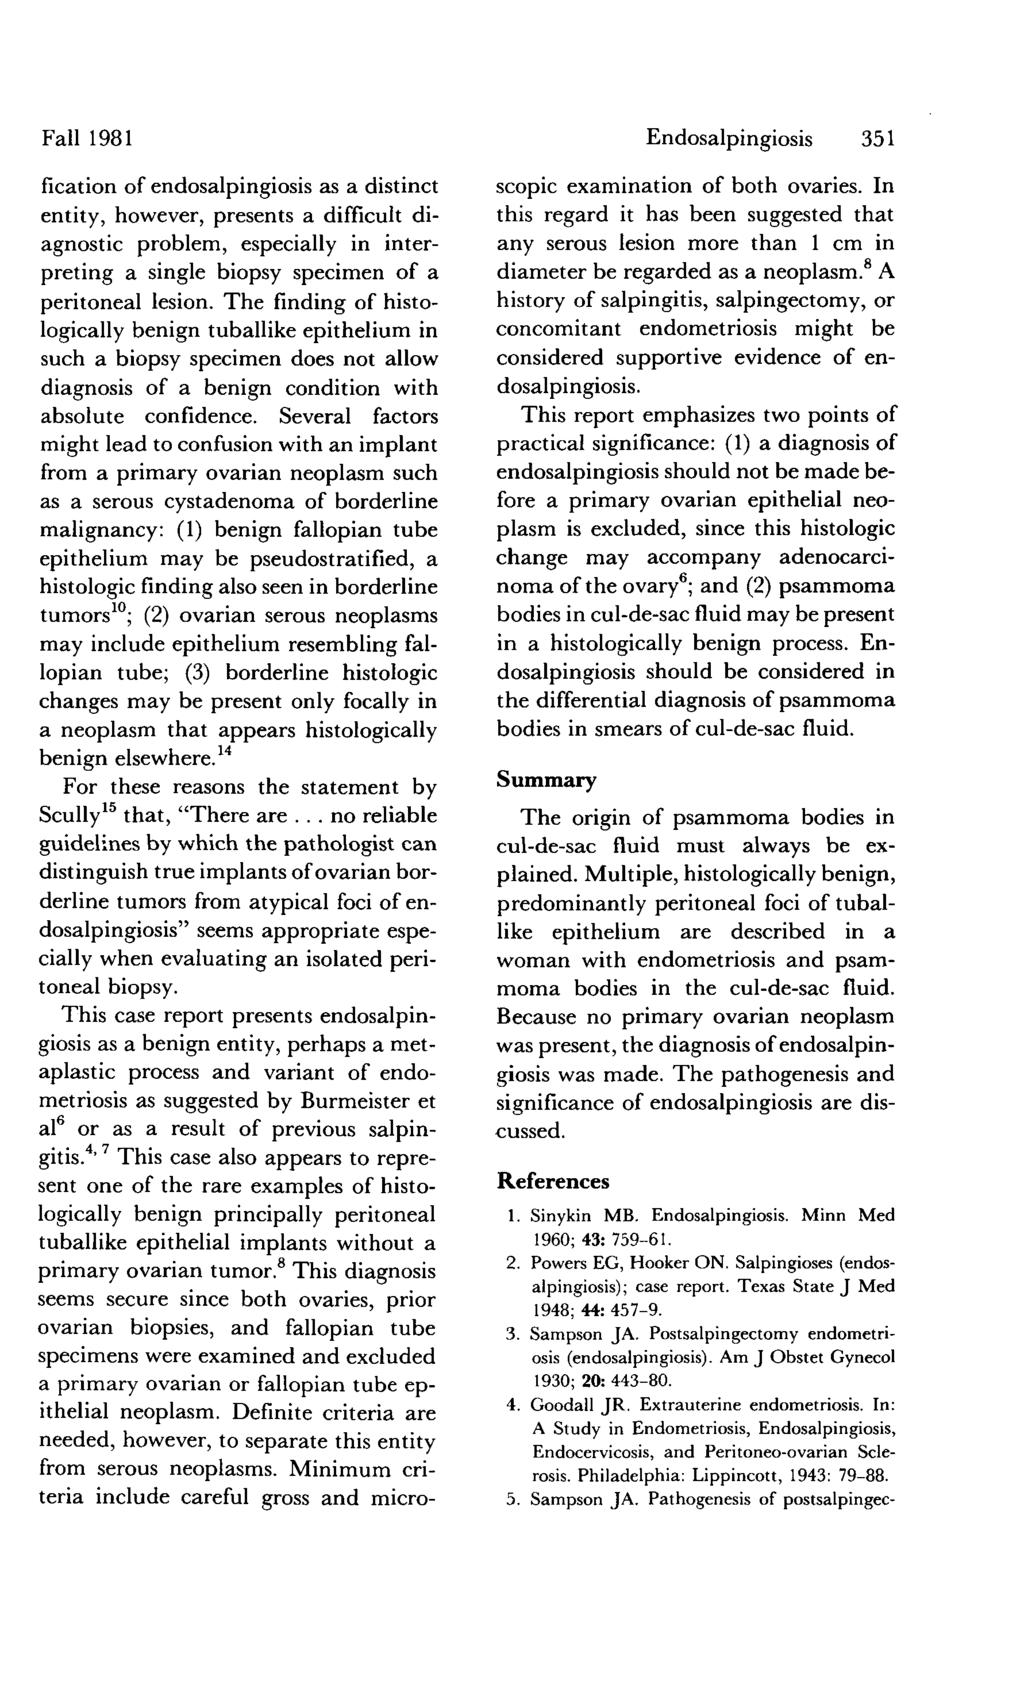 Fall 1981 Endosalpingiosis 351 fication of endosalpingiosis as a distinct entity, however, presents a difficult diagnostic problem, especially in interpreting a single biopsy specimen of a peritoneal